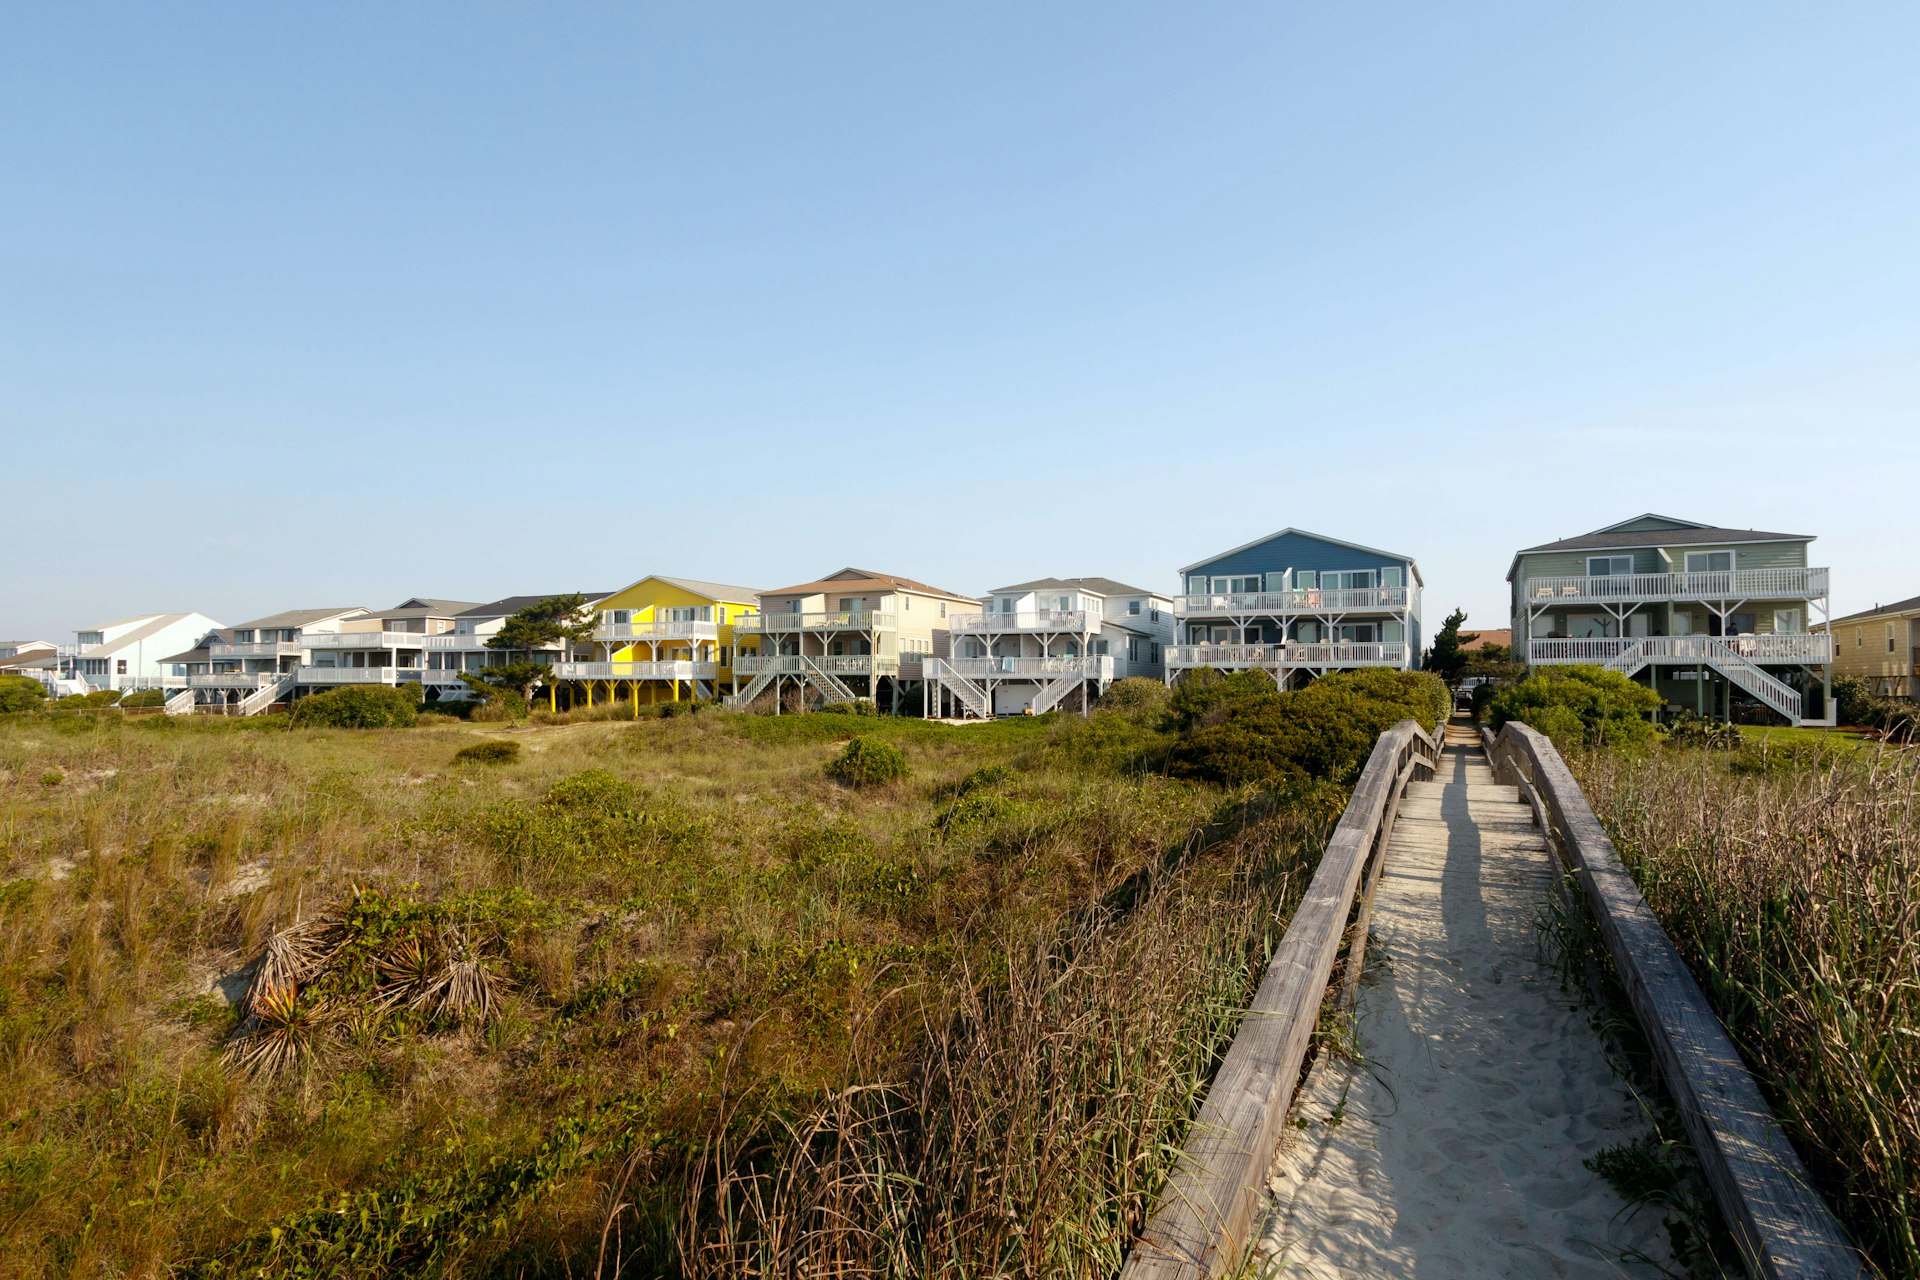 Beach houses across the green sand dunes with a long wooden walkway, Sunset Beach, North Carolina 